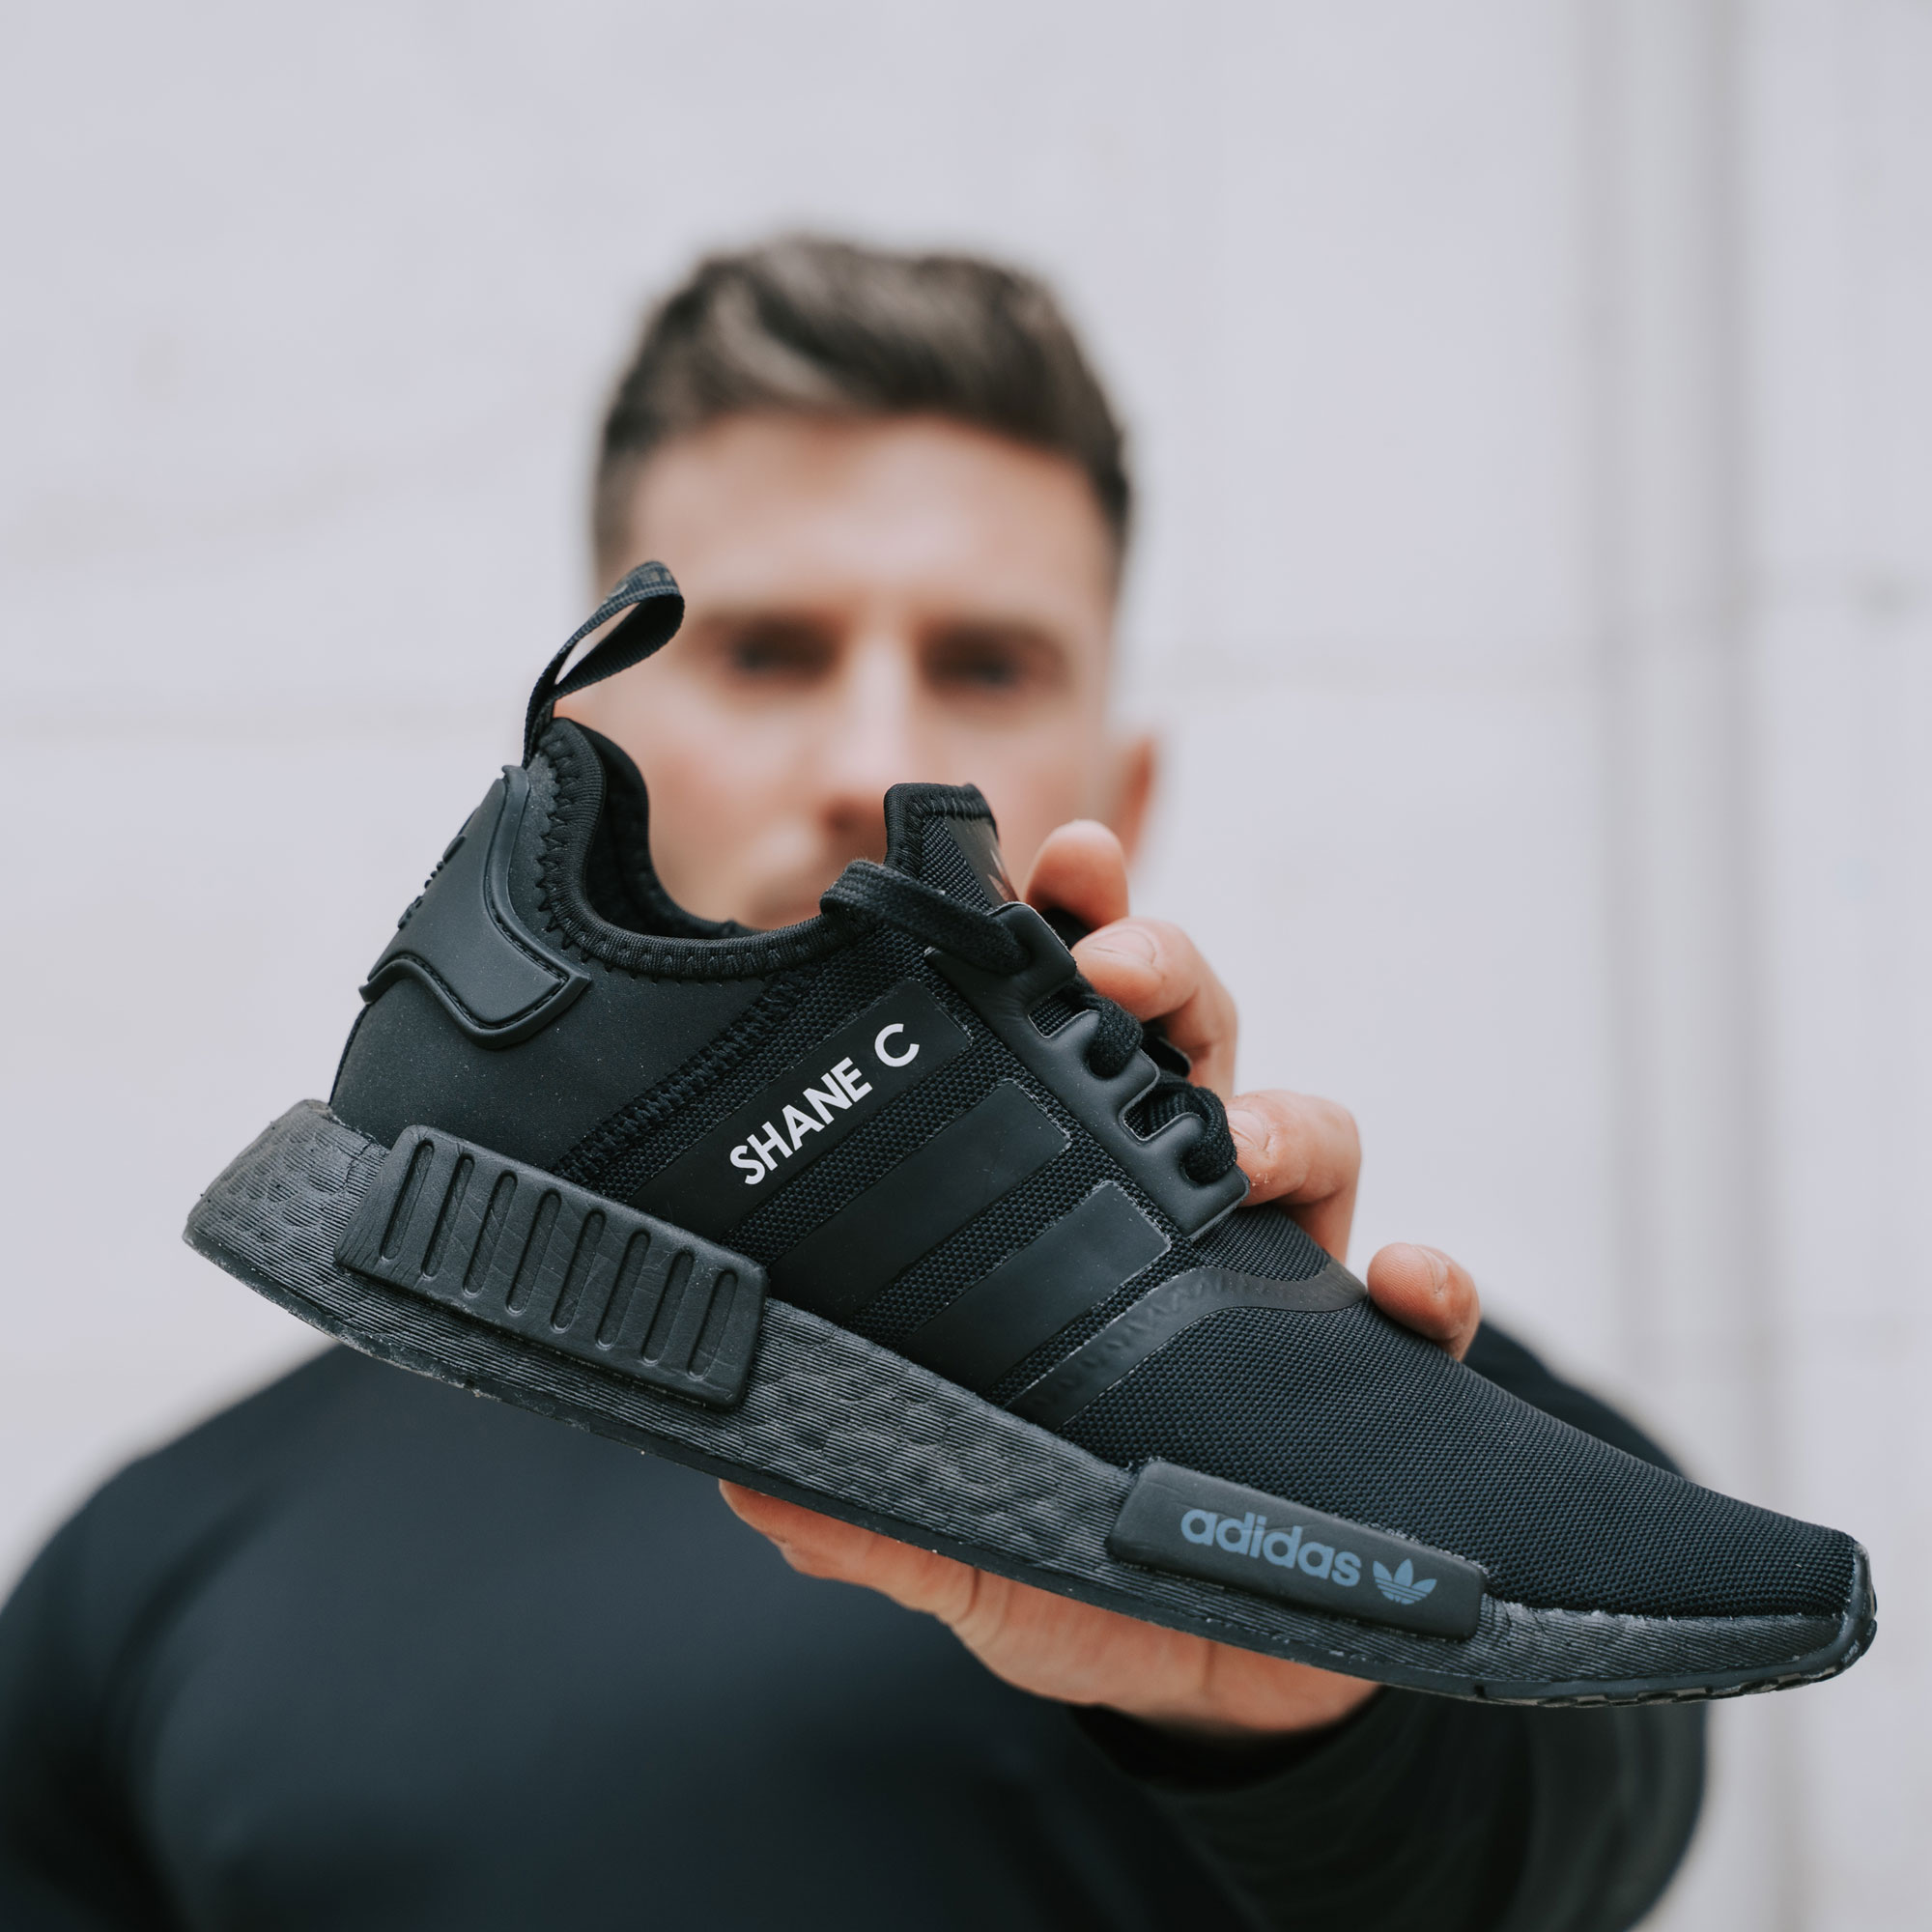 Made a contract 鍔 Extreme Custom Adidas NMD / Personalised Adidas NMD / ID-ME.co.uk